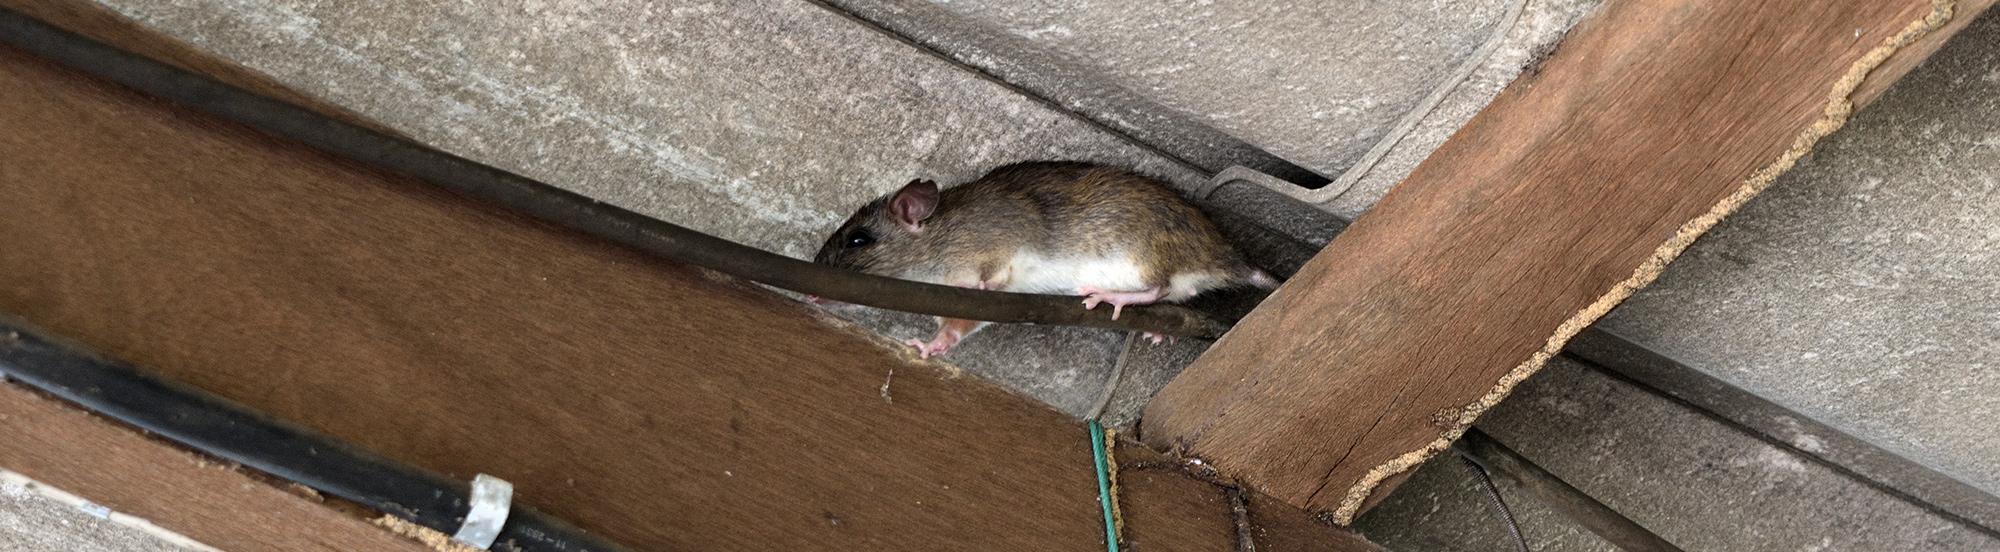 roof rat in the rafters of a house